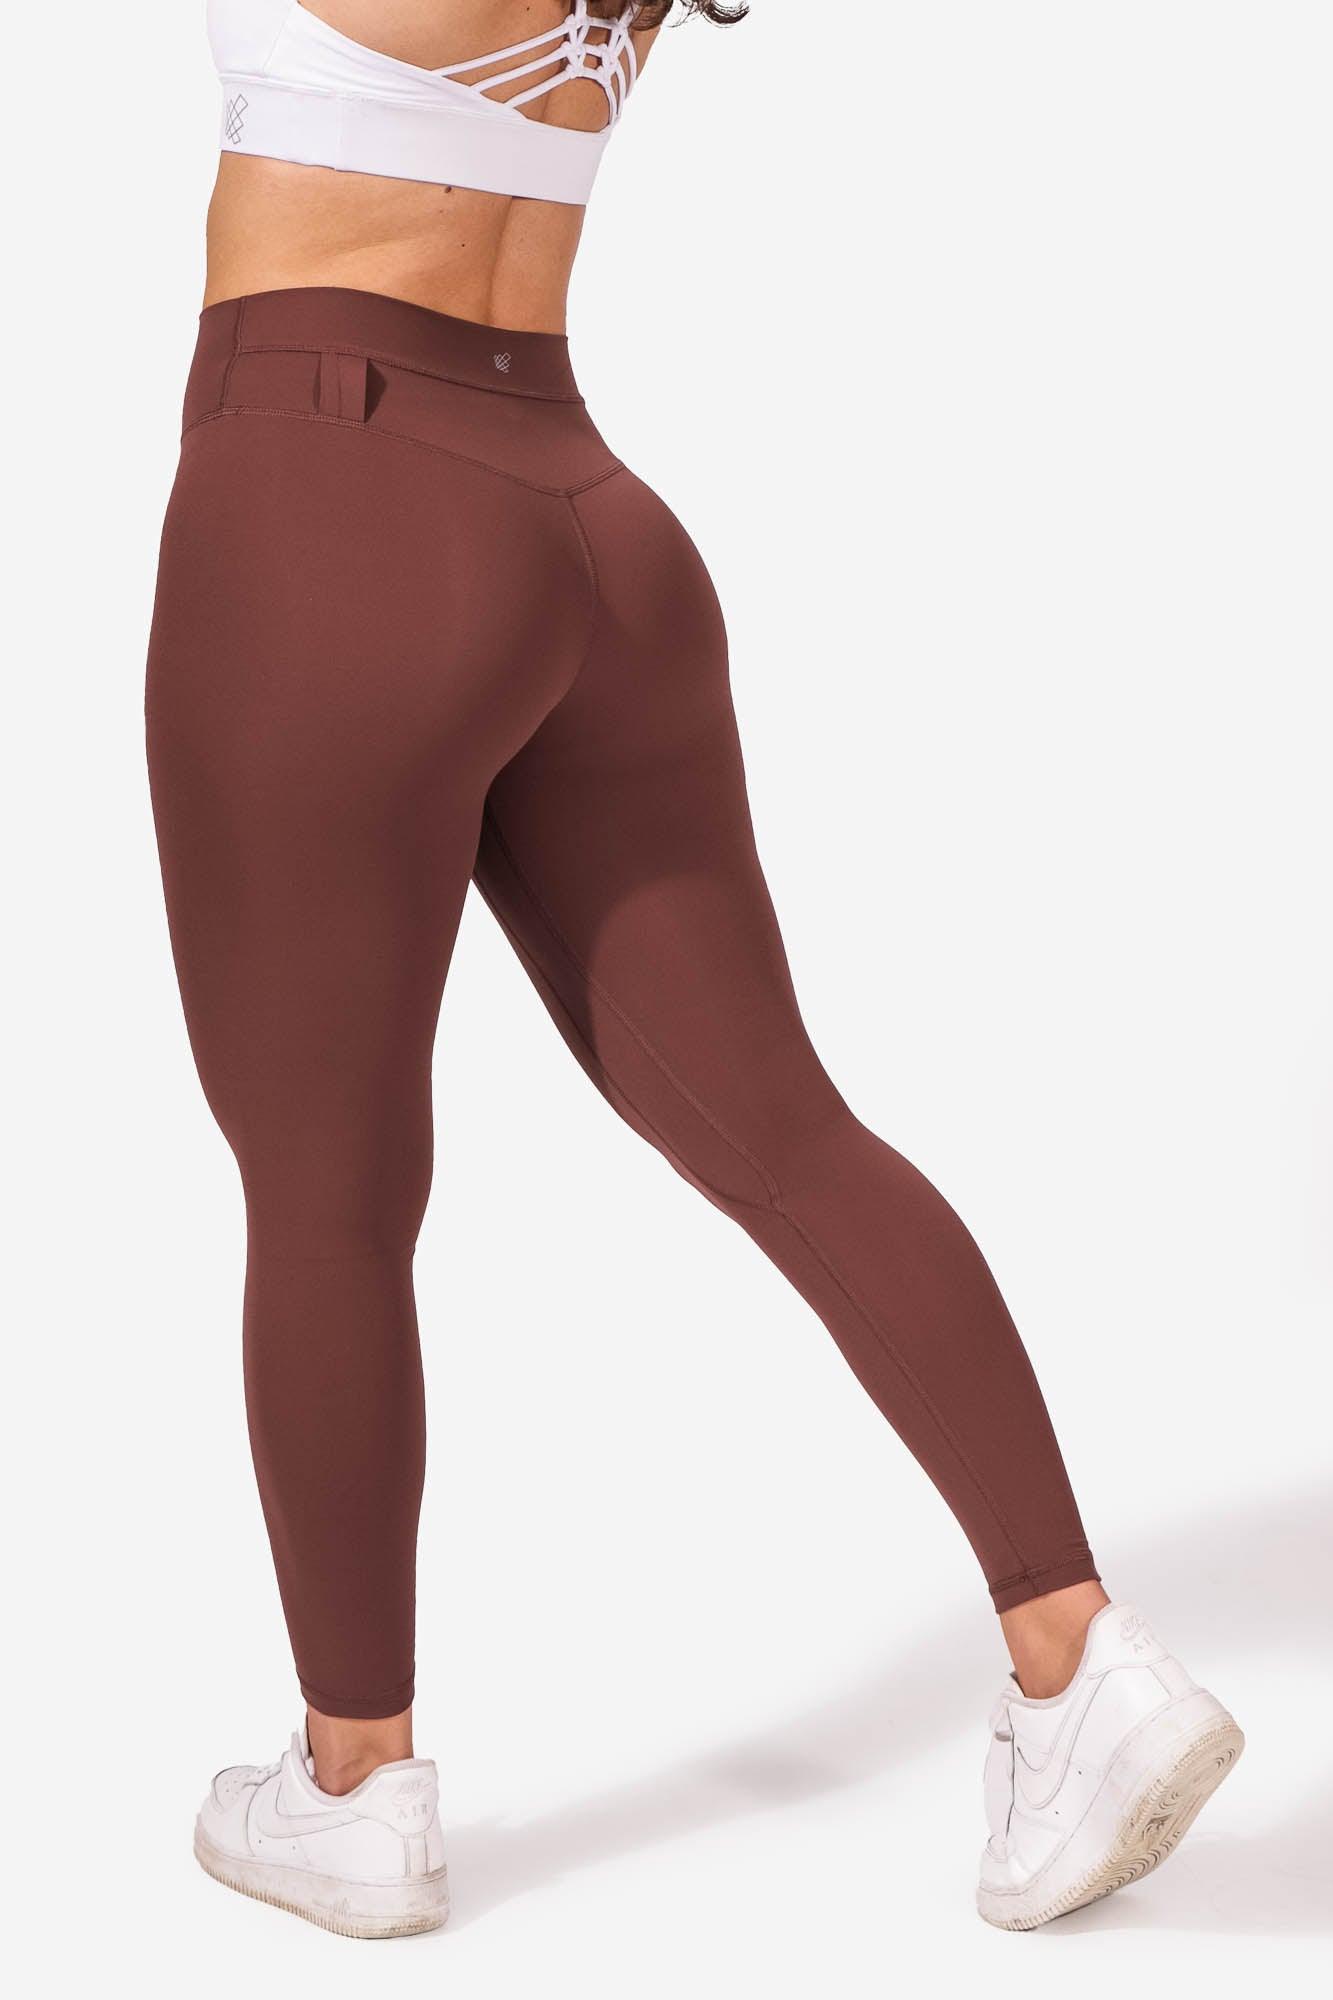 Soft Surroundings, Pants & Jumpsuits, Soft Surroundings Riding Pants  Leggings Cropped Pull On Nylon Blend Brown Med